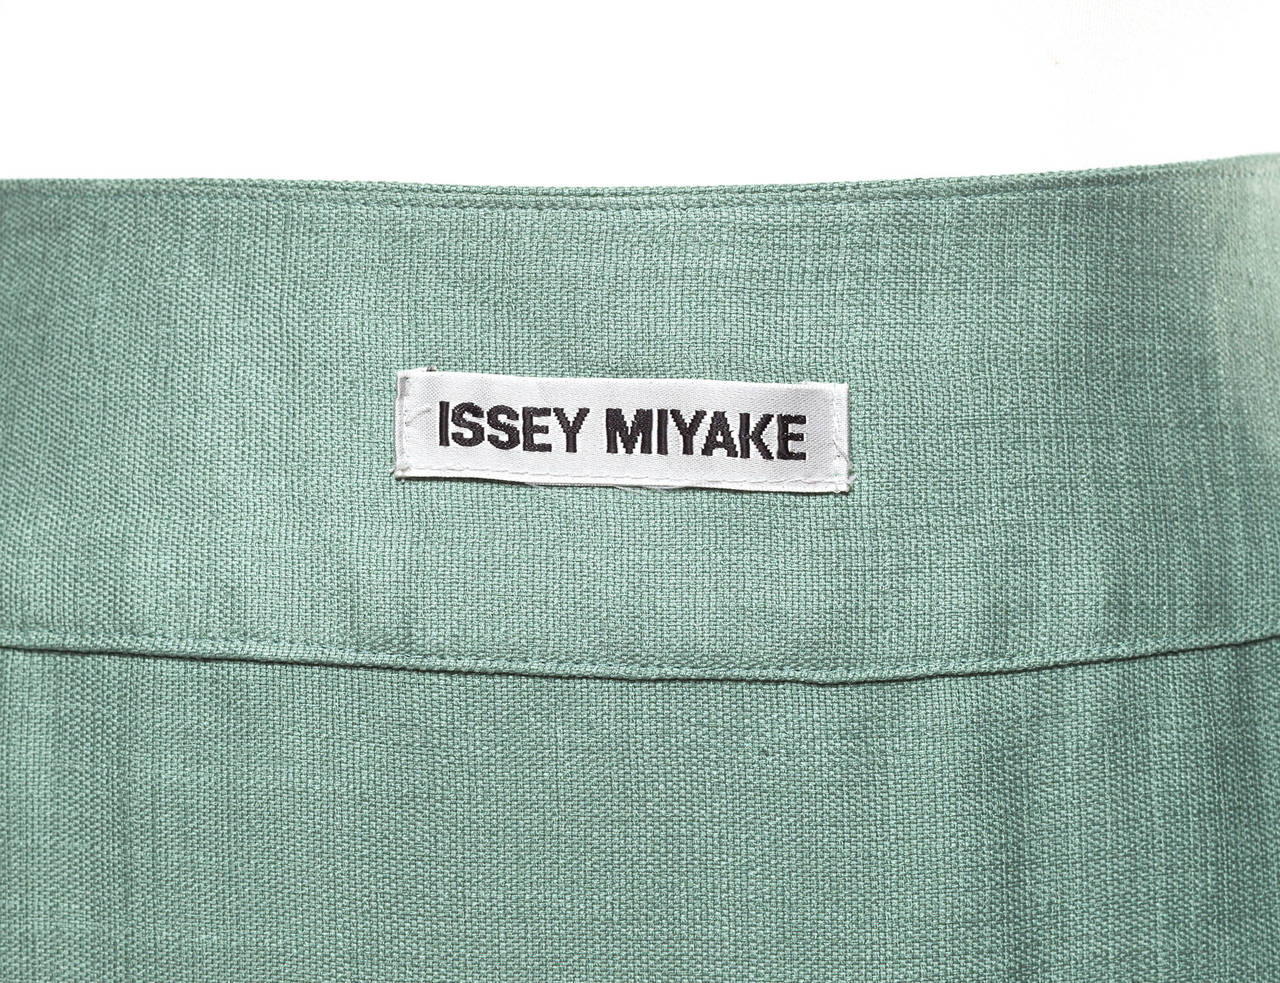 Vintage 90's Issey Miyake Celadon Green Skirt with pleated front detail, Sz. 8 3